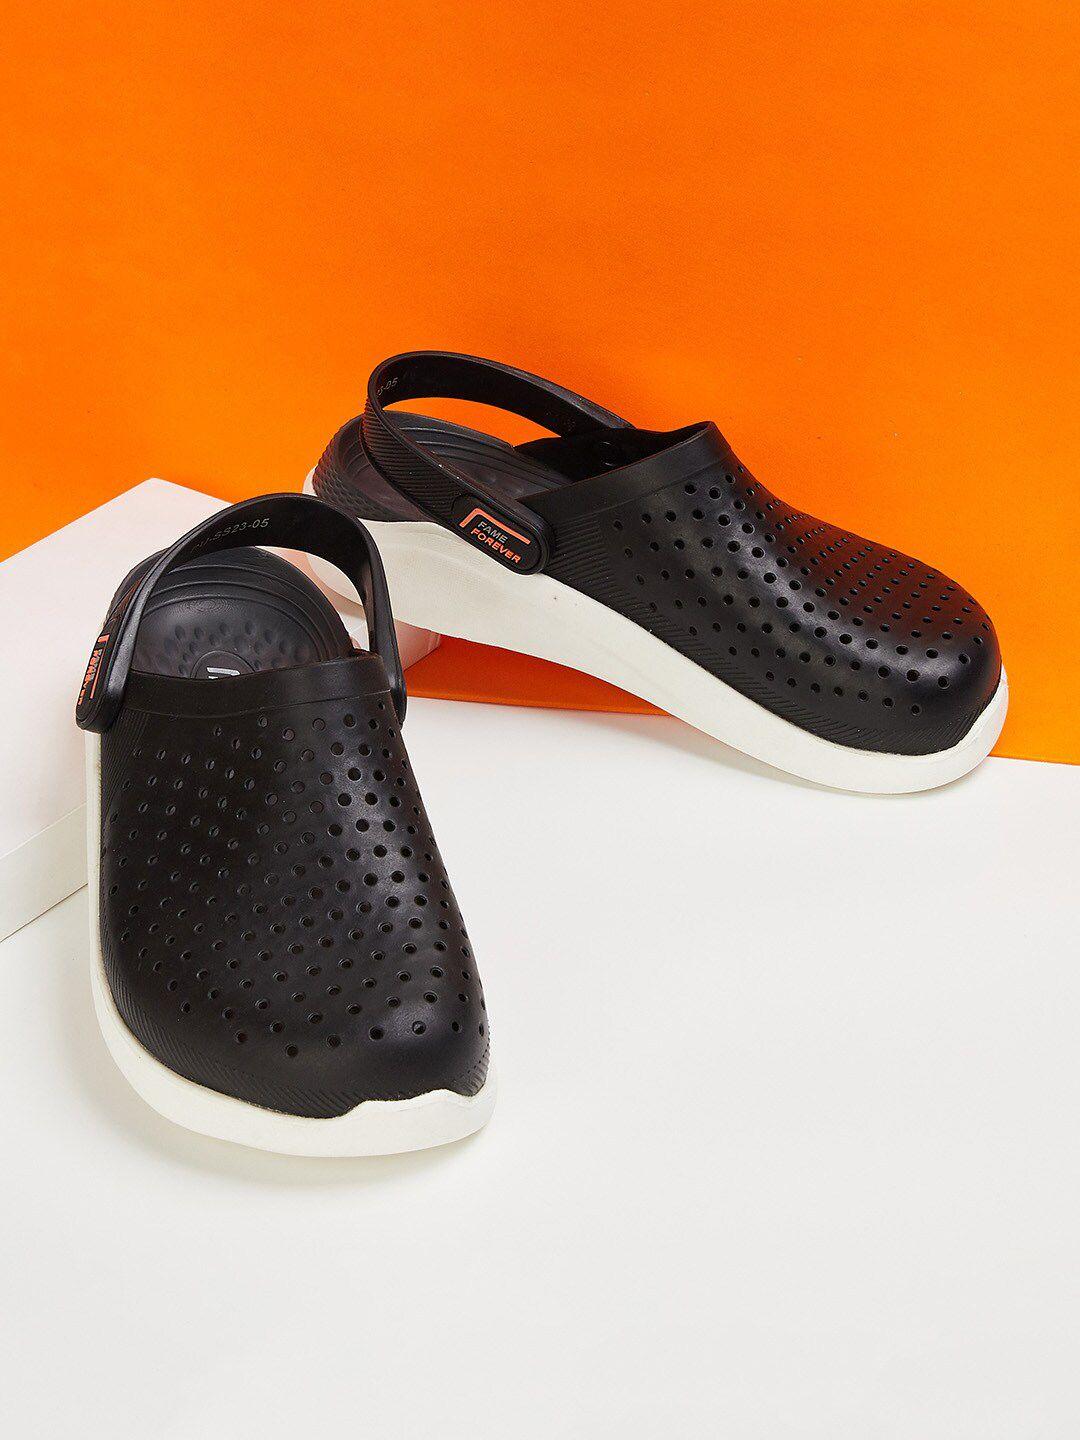 fame-forever-by-lifestyle-boys-self-design-rubber-clogs